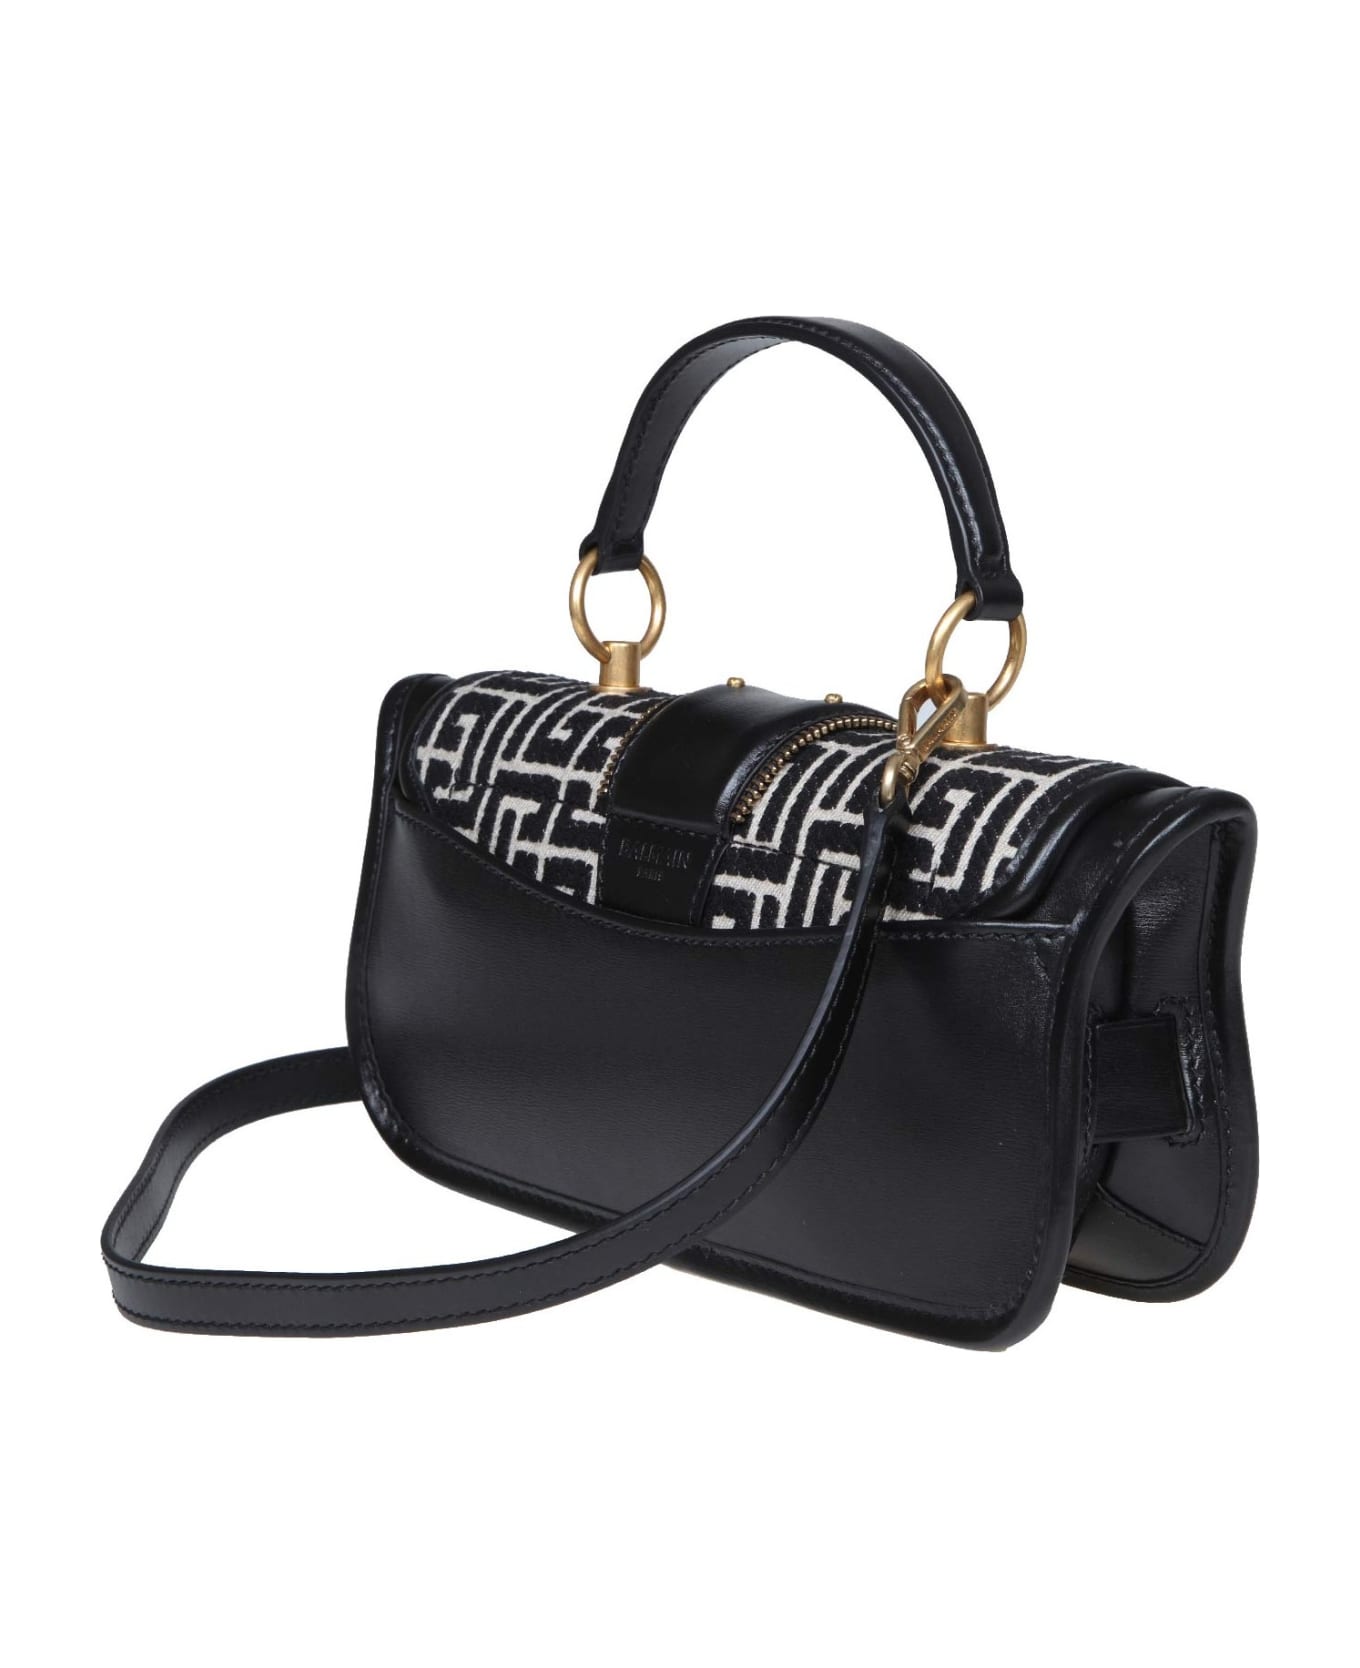 Balmain Baguette Blaze Piuch-box In Leather And Monogram Fabric - Ivory/Black